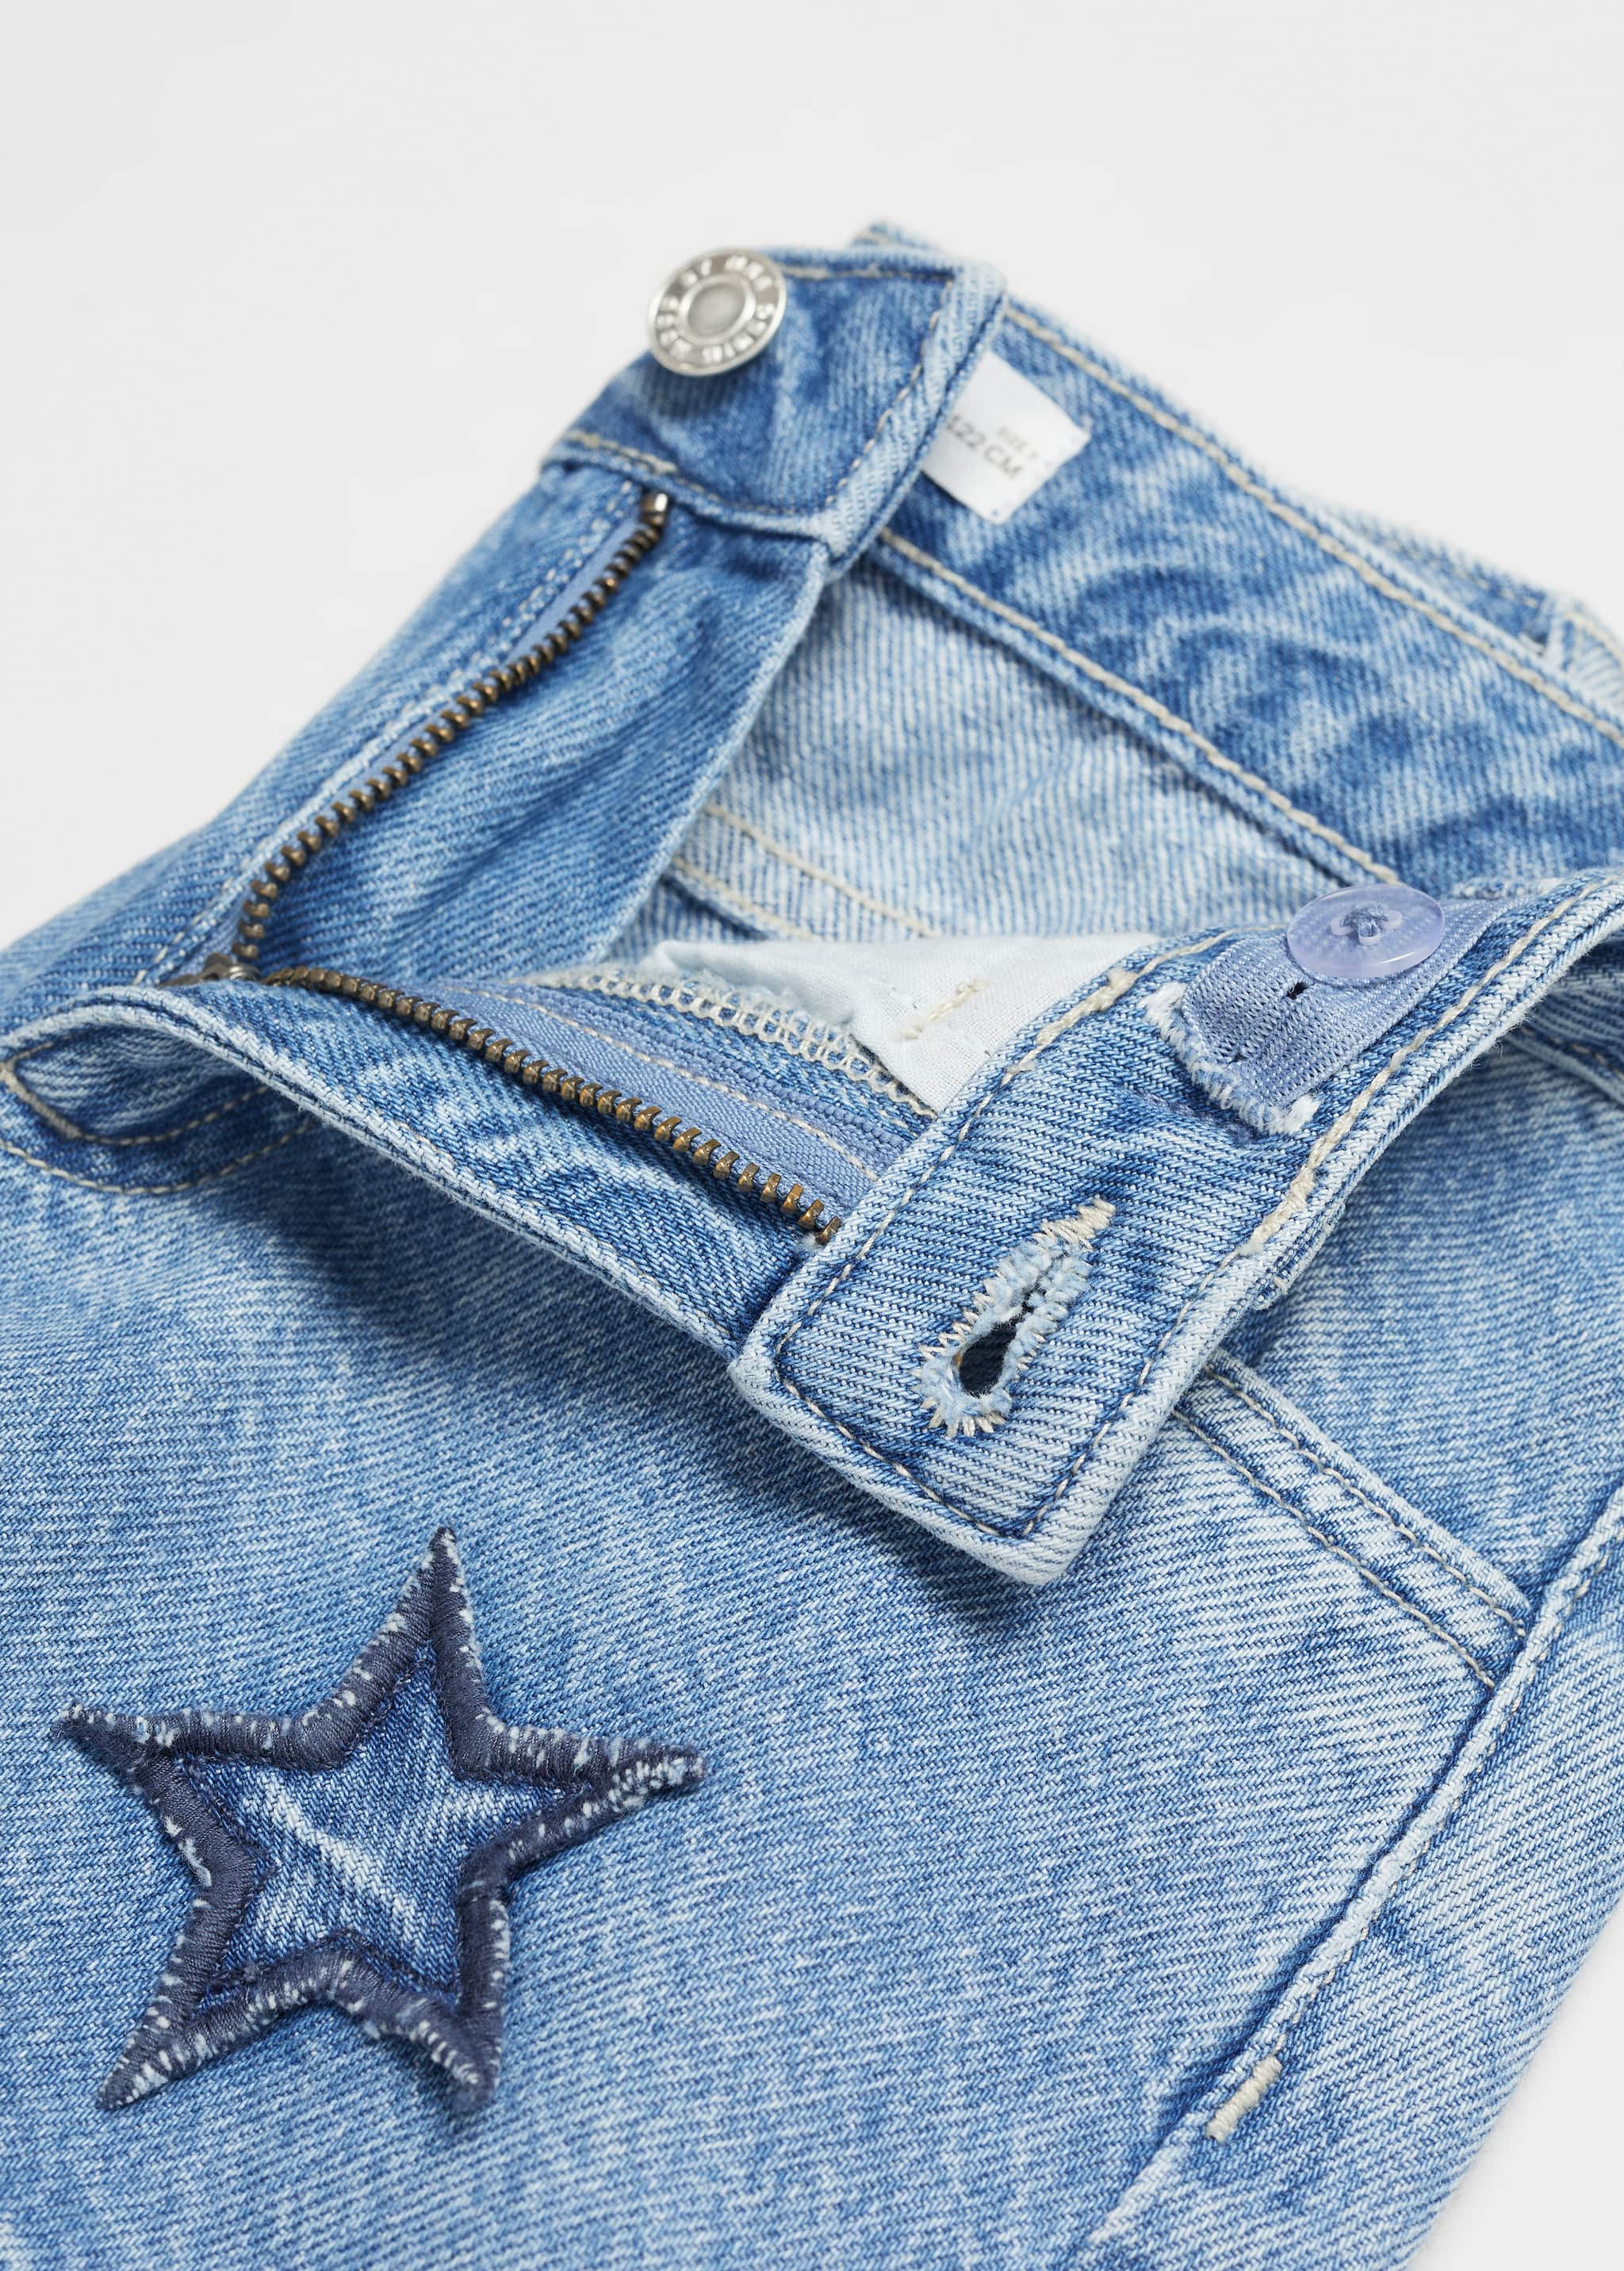 Star denim shorts - Details of the article 8